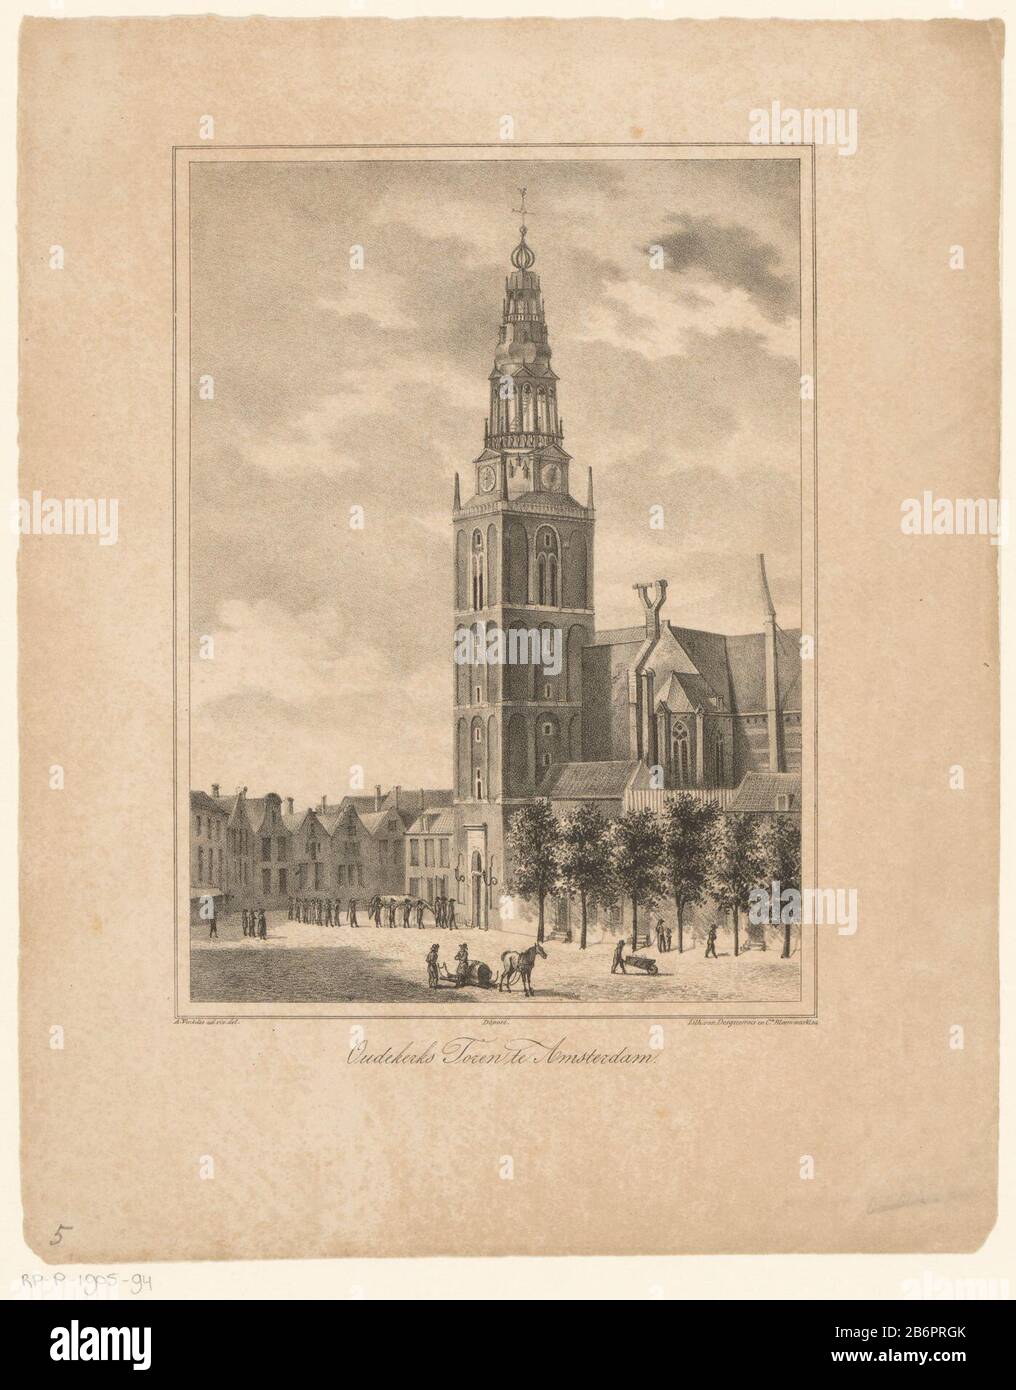 Gezicht op de Westertoren te Amsterdam Wester Toren te Amsterdam (titel op object) Gezichten van de Zes Voornaamste Torens der Stad Amsterdam 2de Cahier (serietitel) View of the Wester, Amsterdam Wester Tower Amsterdam (title object) Faces Six Main Towers of the City of Amsterdam. 2nd Cahier (series title) Property Type: picture Item number: RP-P-1905-94 Inscriptions / Brands: collector's mark, verso, stamped: Lugt 2228octrooivermelding, recto, printed: 'Déposé.' Manufacturer : printmaker: anonymous design by Abraham Vinkeles (listed object) printer: Desguerrois & Co. (Listed property) Place m Stock Photo